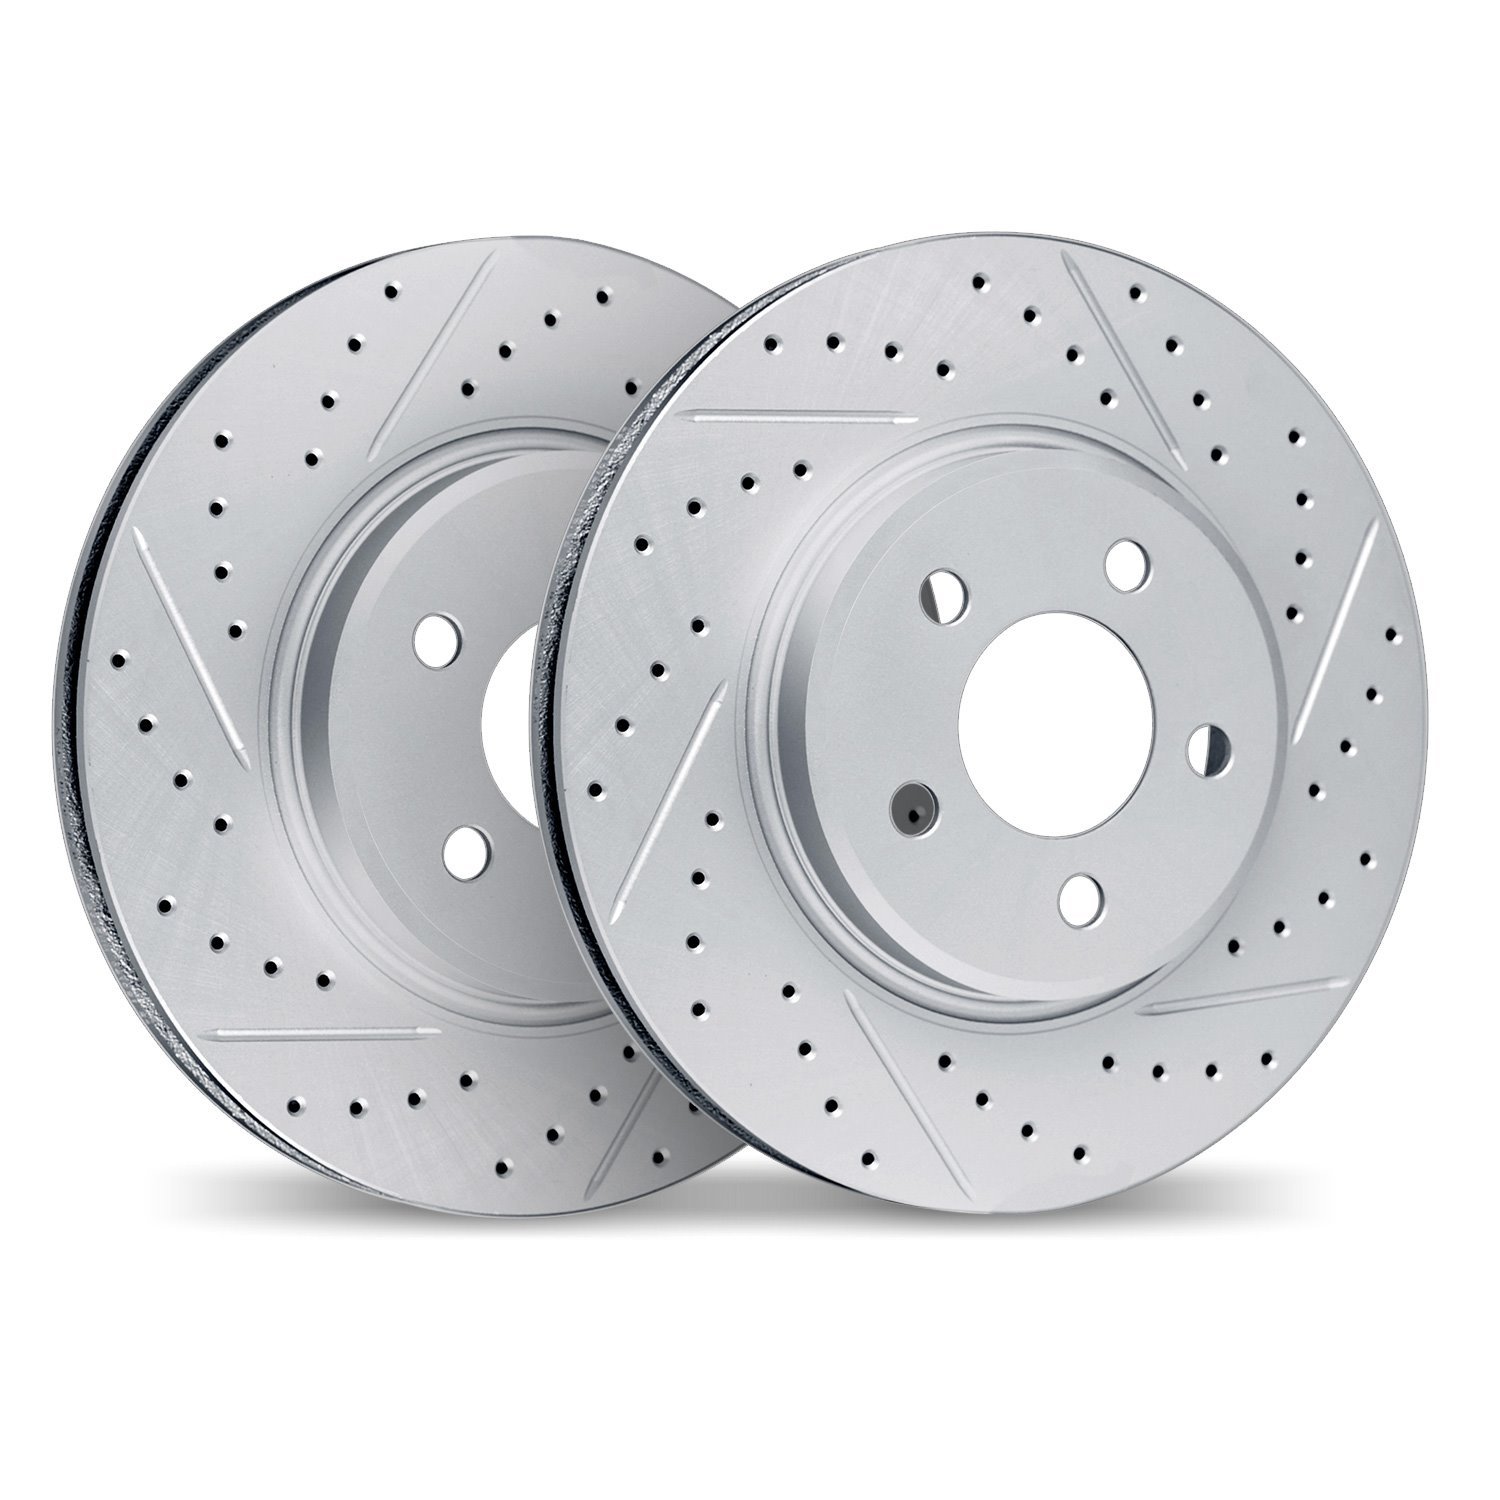 2002-32011 Geoperformance Drilled/Slotted Brake Rotors, Fits Select Mini, Position: Front